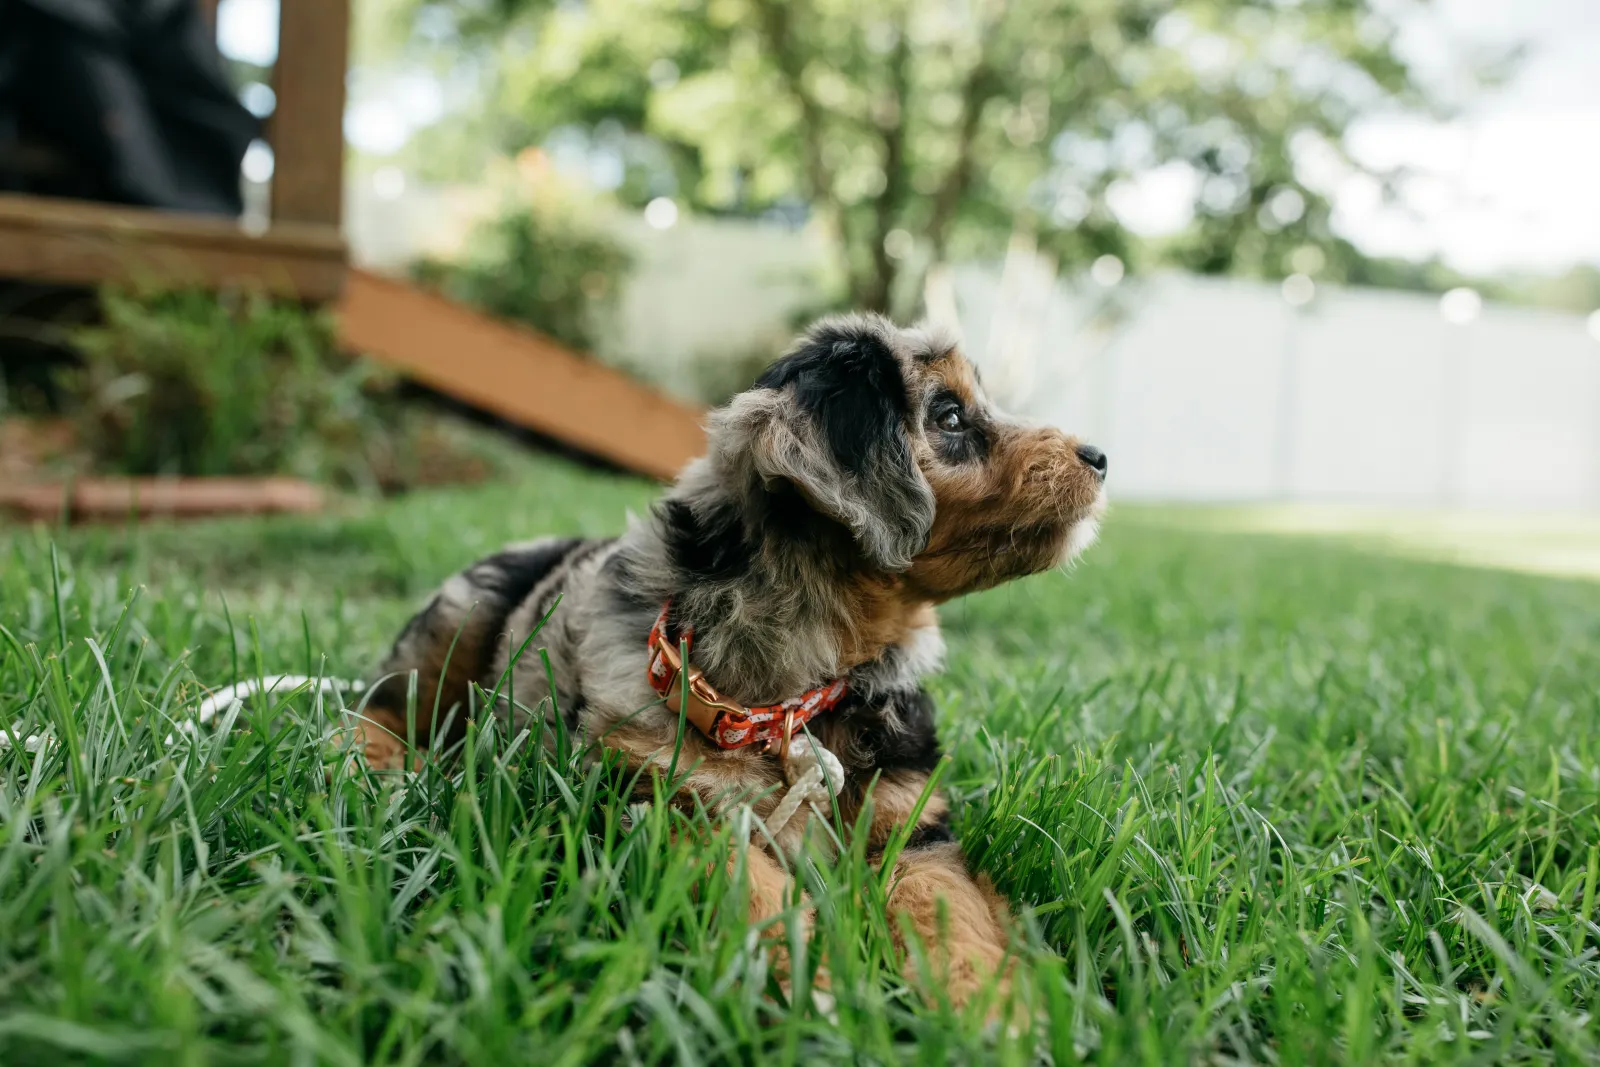 an Aussiedoodle, a hypoallergenic dog breed, sitting in the grass outside looking to the right